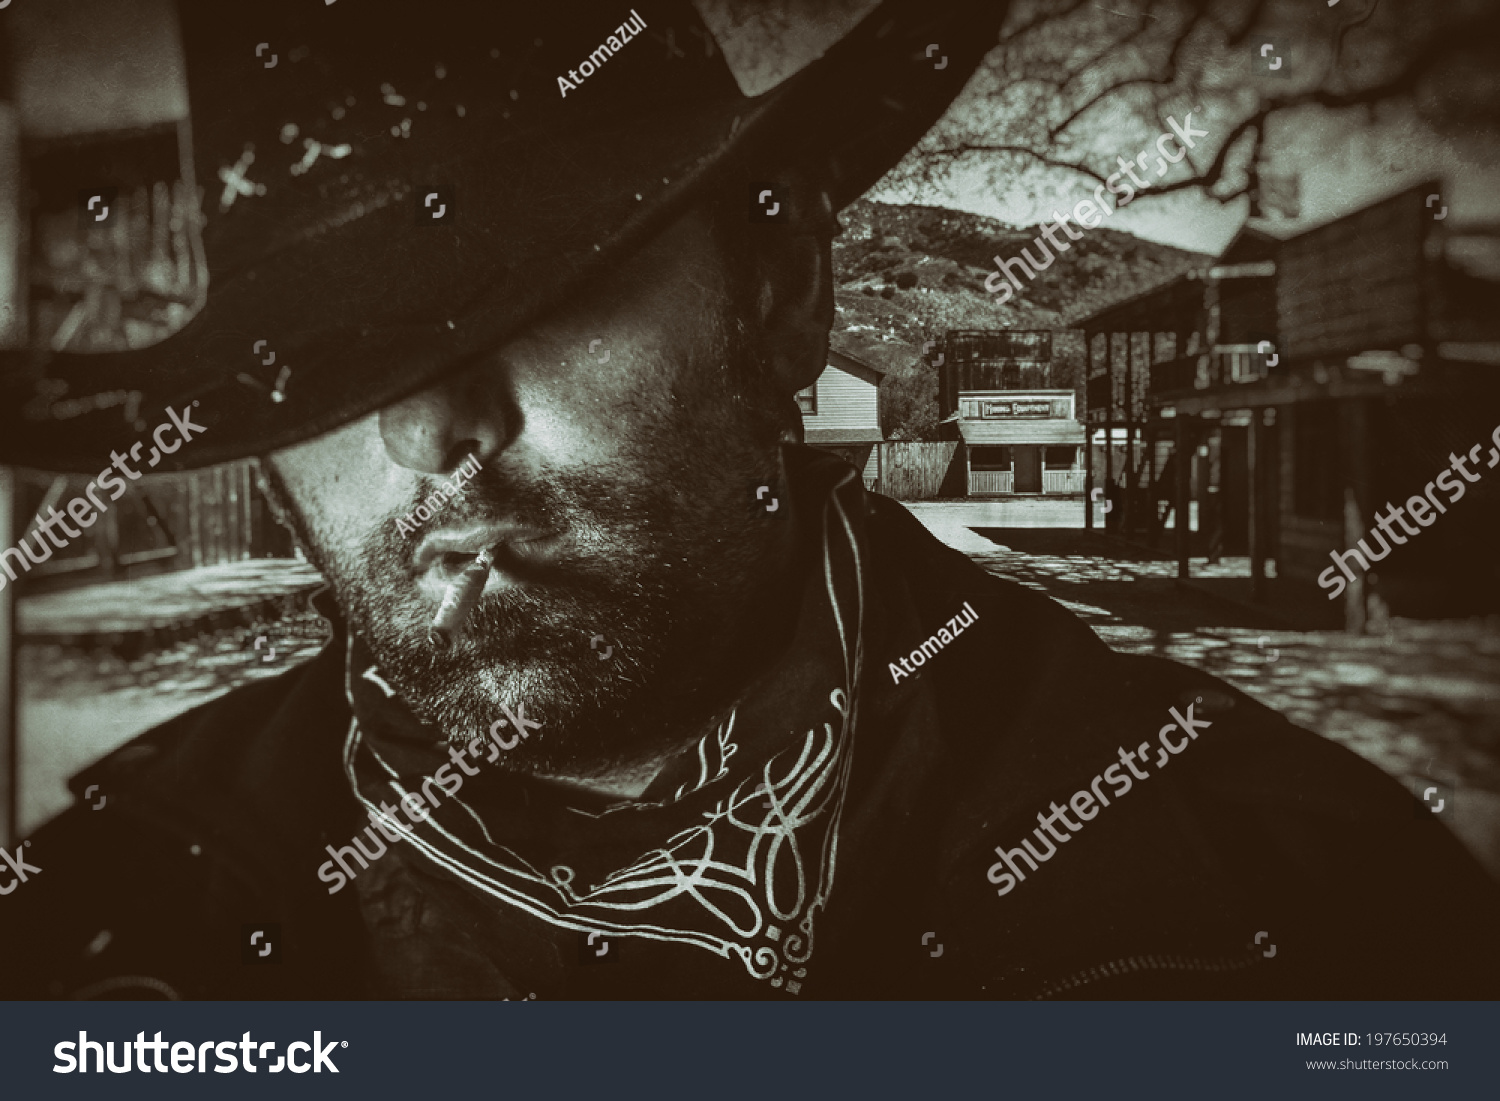 Old West Cowboy Western Town. An old west cowboy in a hat smoking a hand rolled cigarette with an old western town setting in the background, edited in vintage film style. #197650394